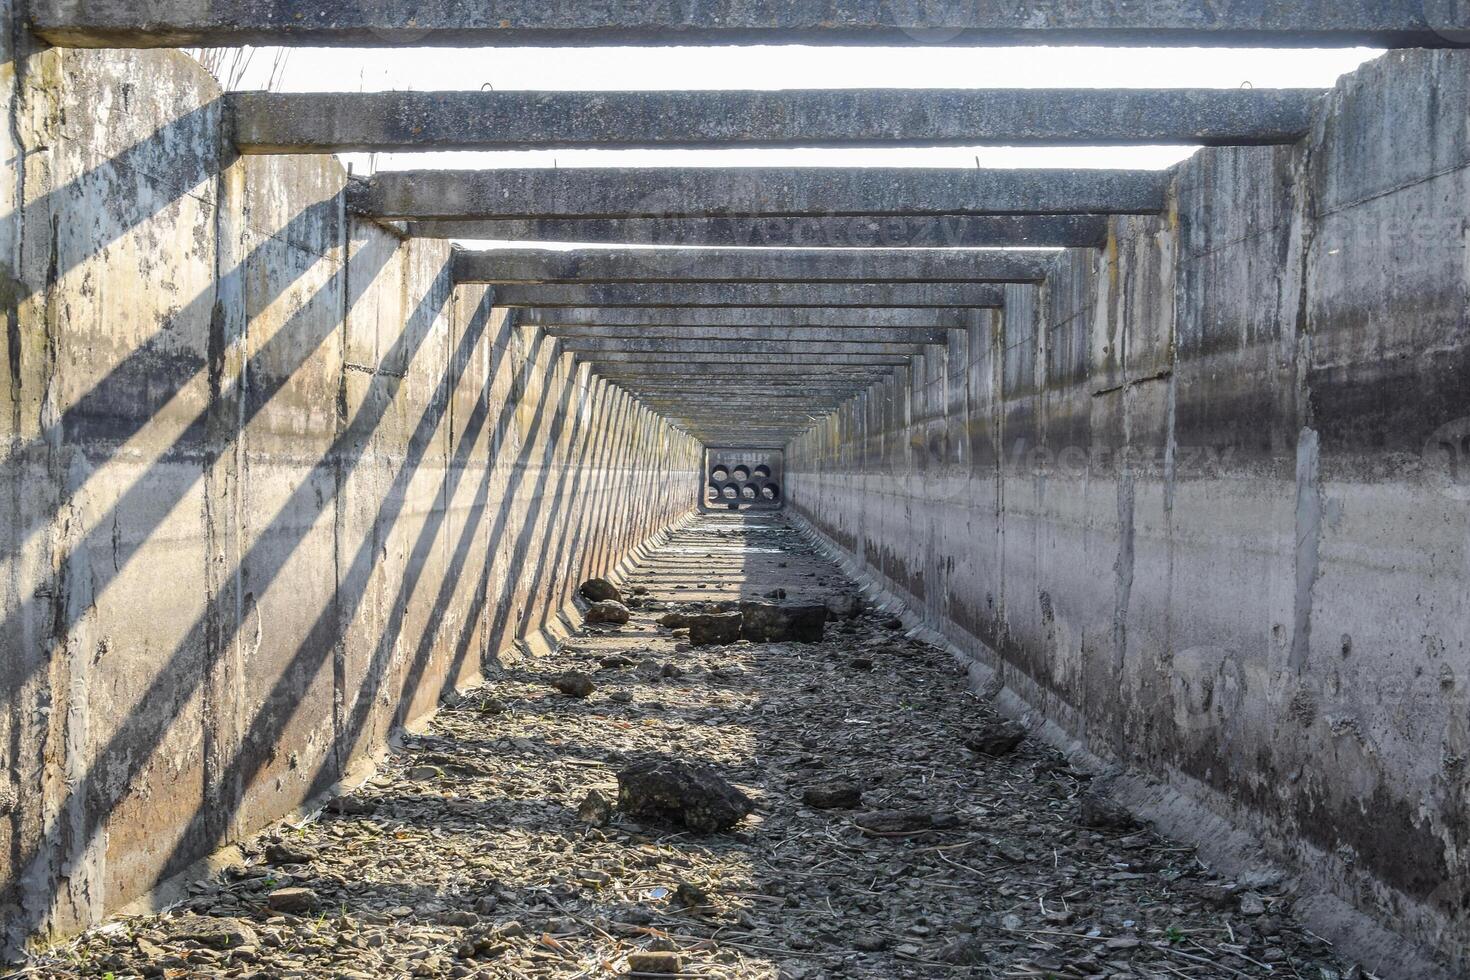 inside view of the irrigation artificial concrete channel. photo